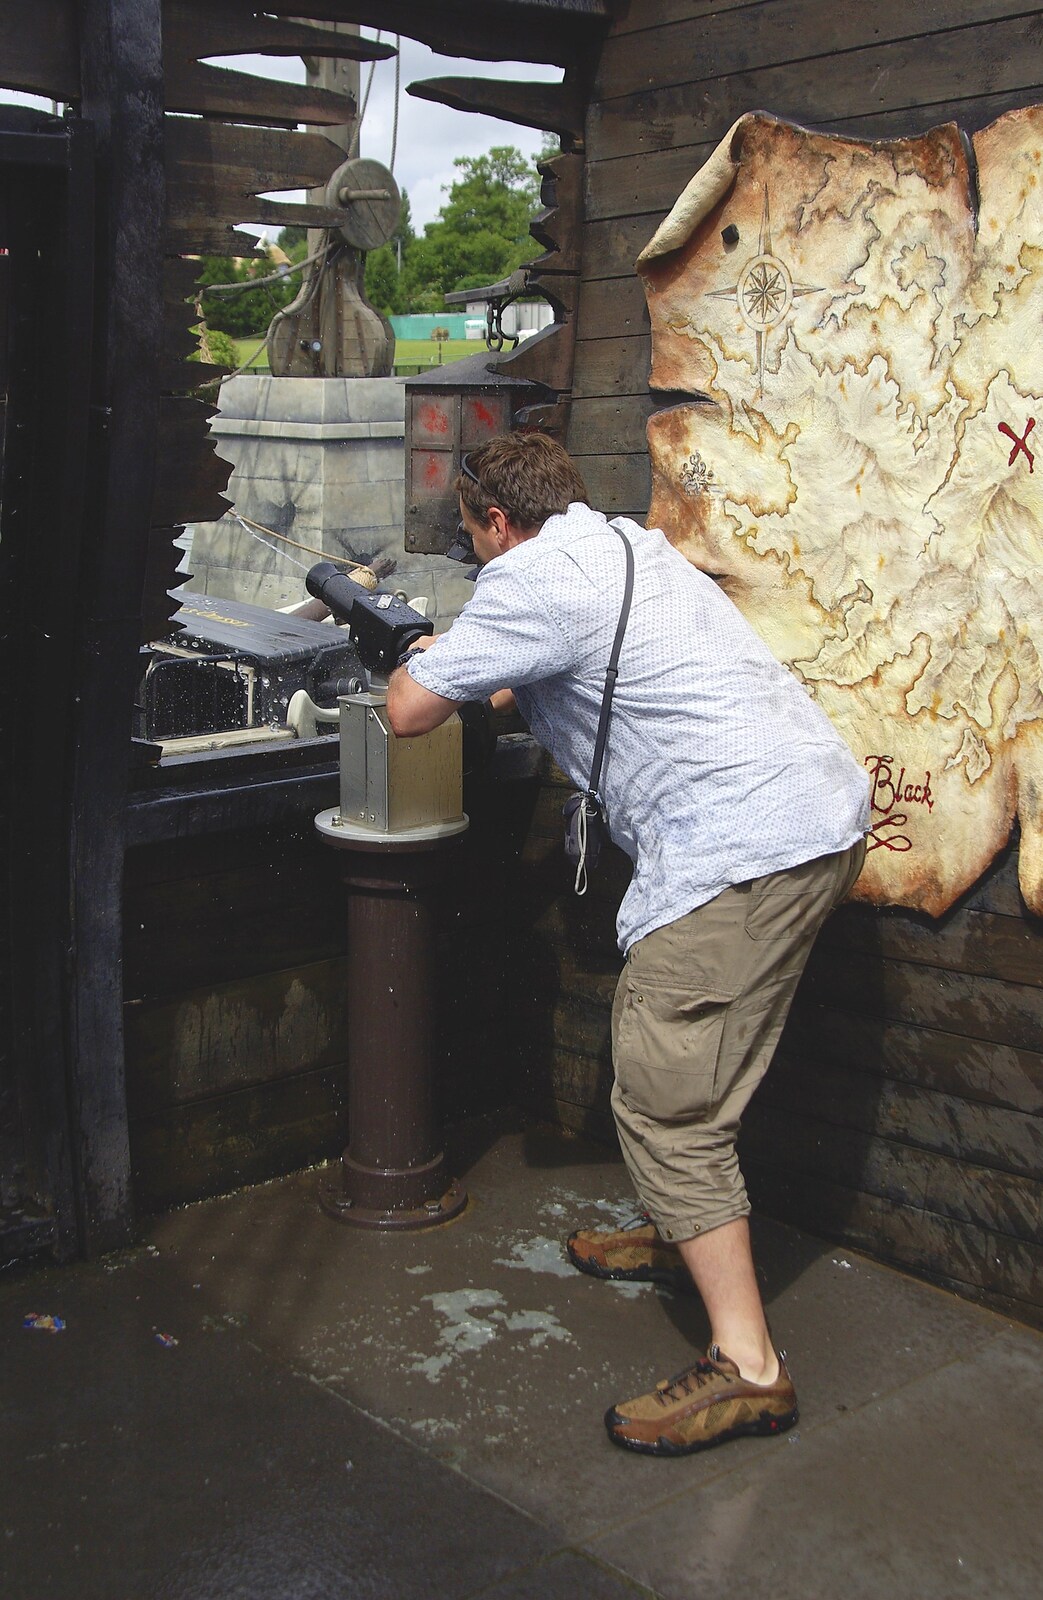 Qualcomm at Alton Towers, Staffordshire - 29th June 2008: Dan fires off a water cannon